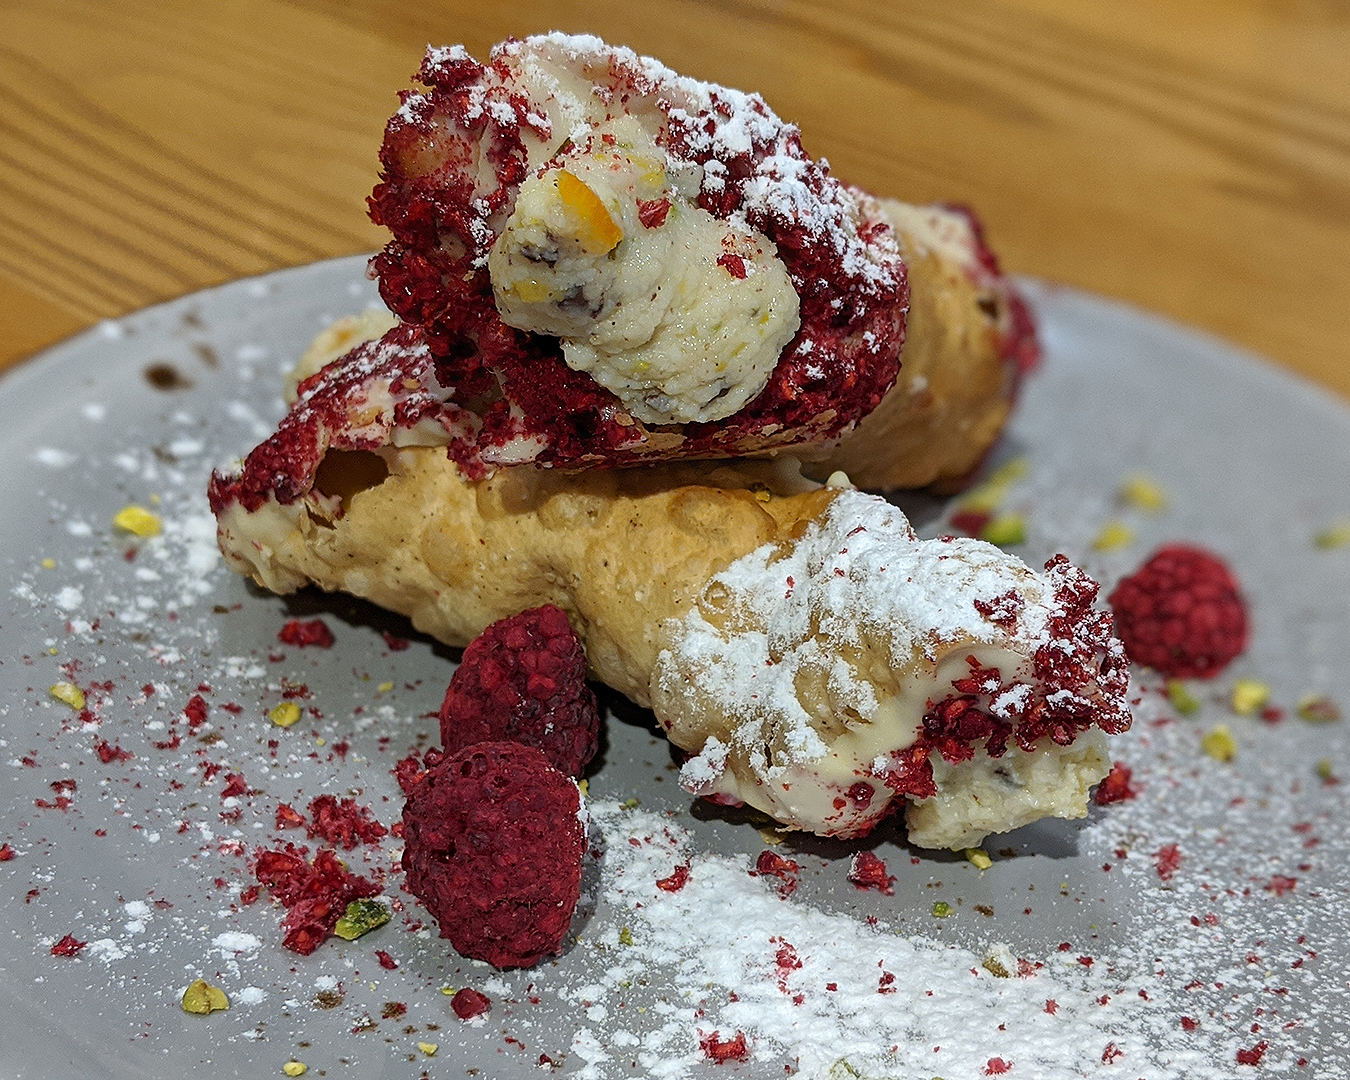 The cannoli at Toto, in the CBD. Sitting on a plate beautifully dusted with icing sugar and covered with rapberries.